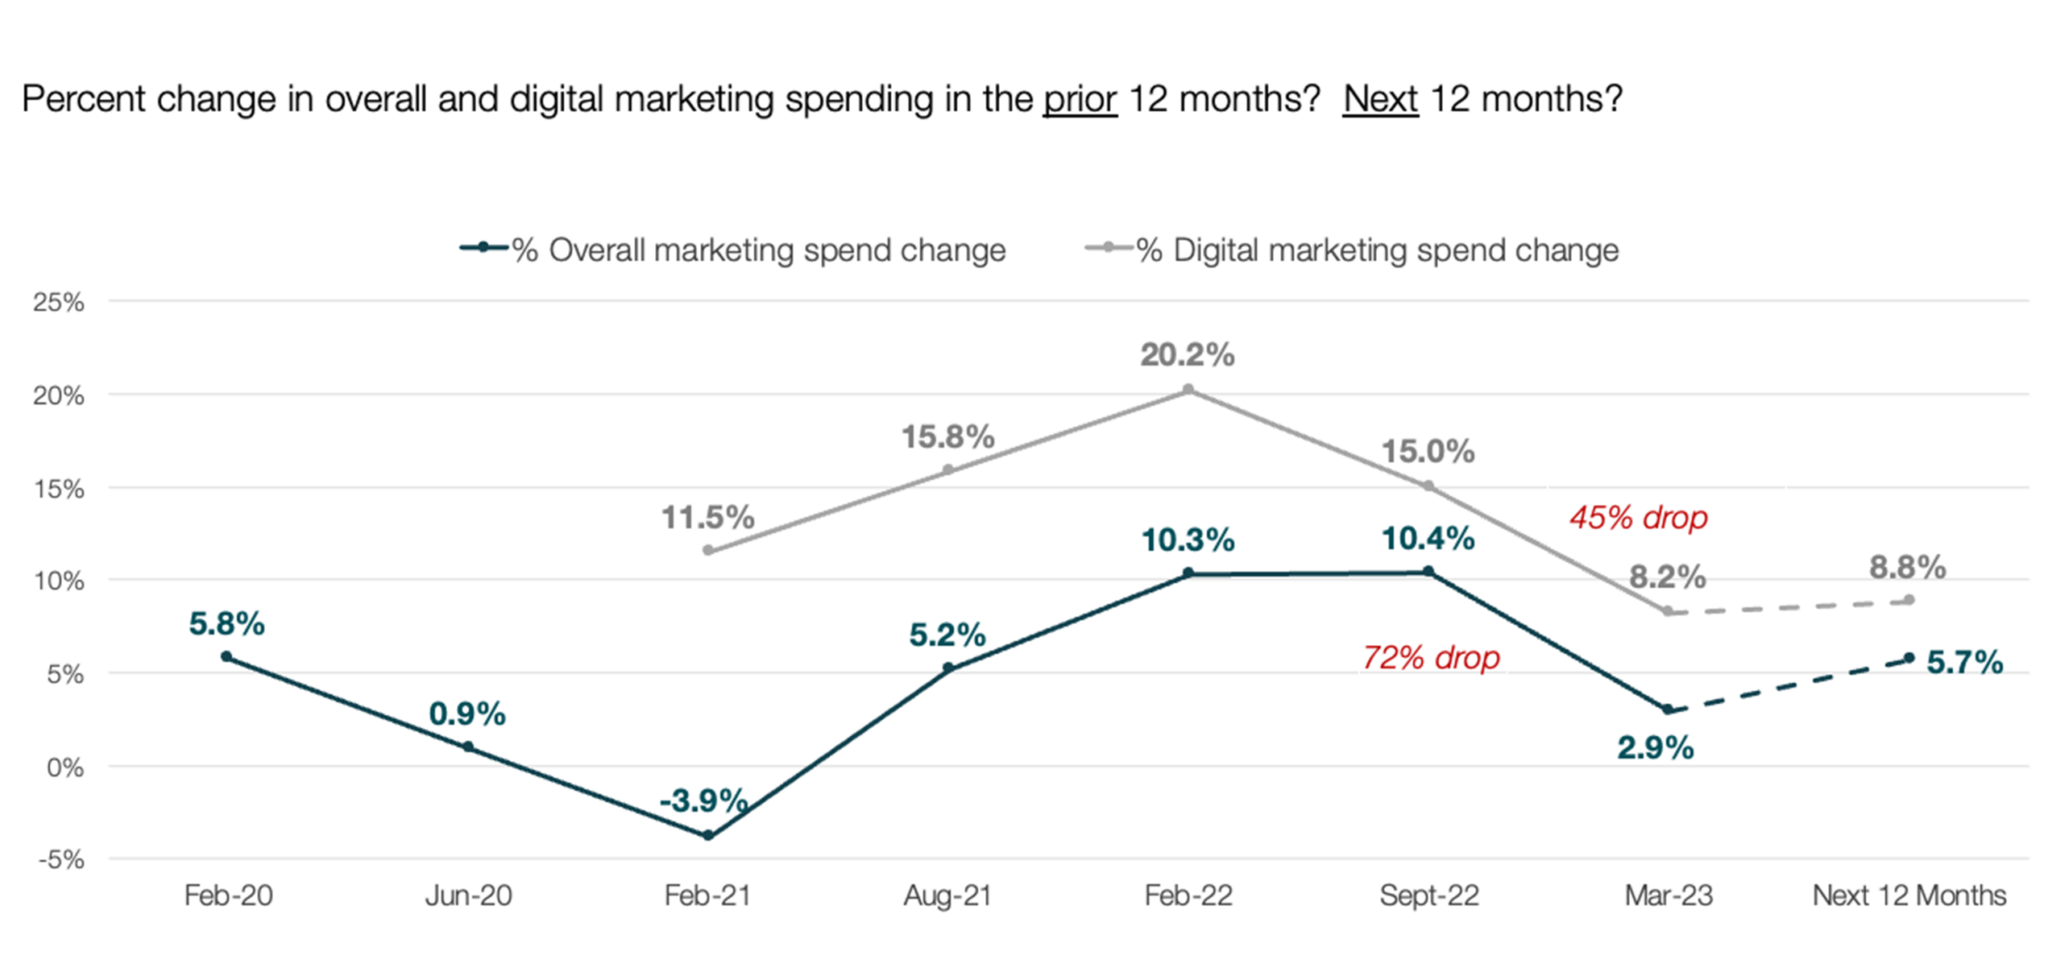 Percent change in overall and digital marketing spending in the prior 12 months? Next 12 months?